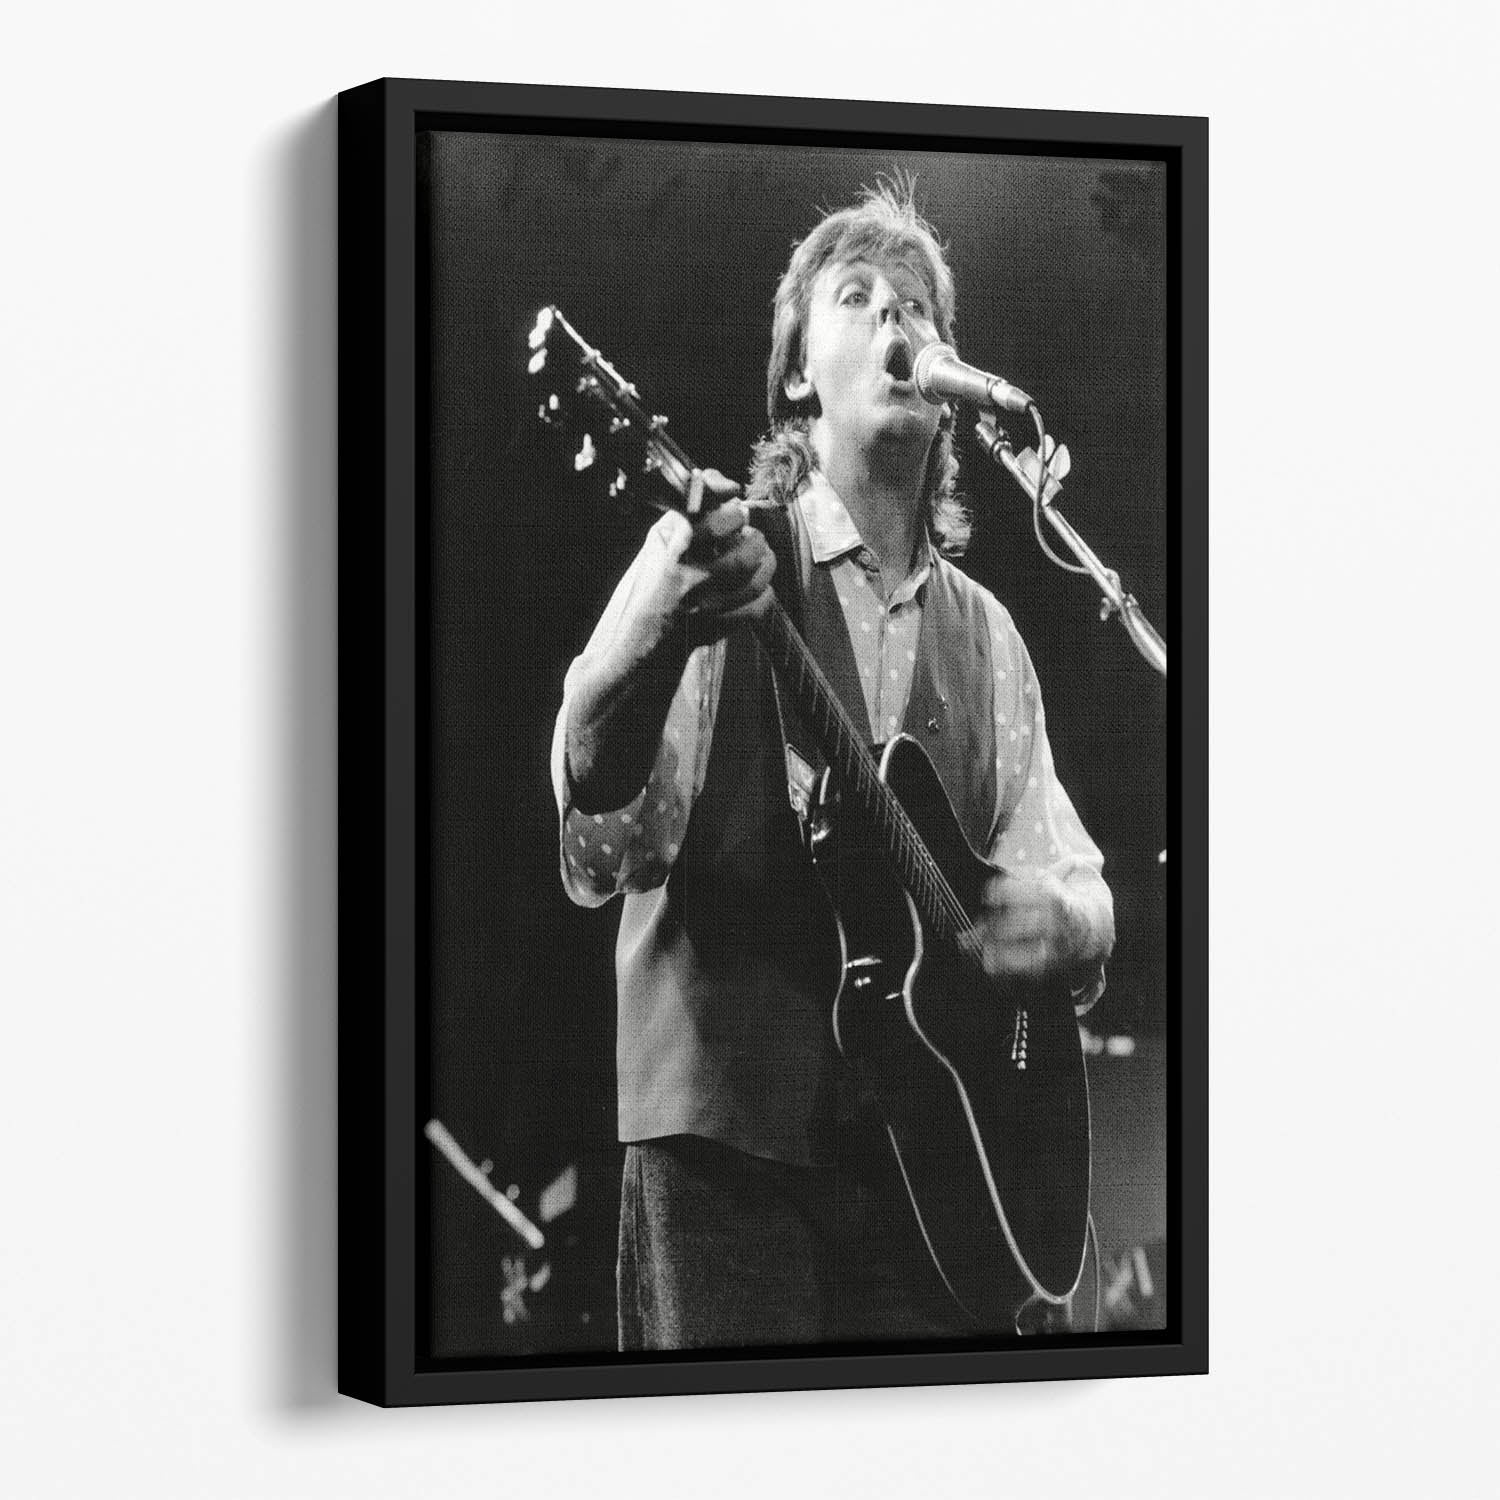 Paul McCartney on stage in 1989 Floating Framed Canvas